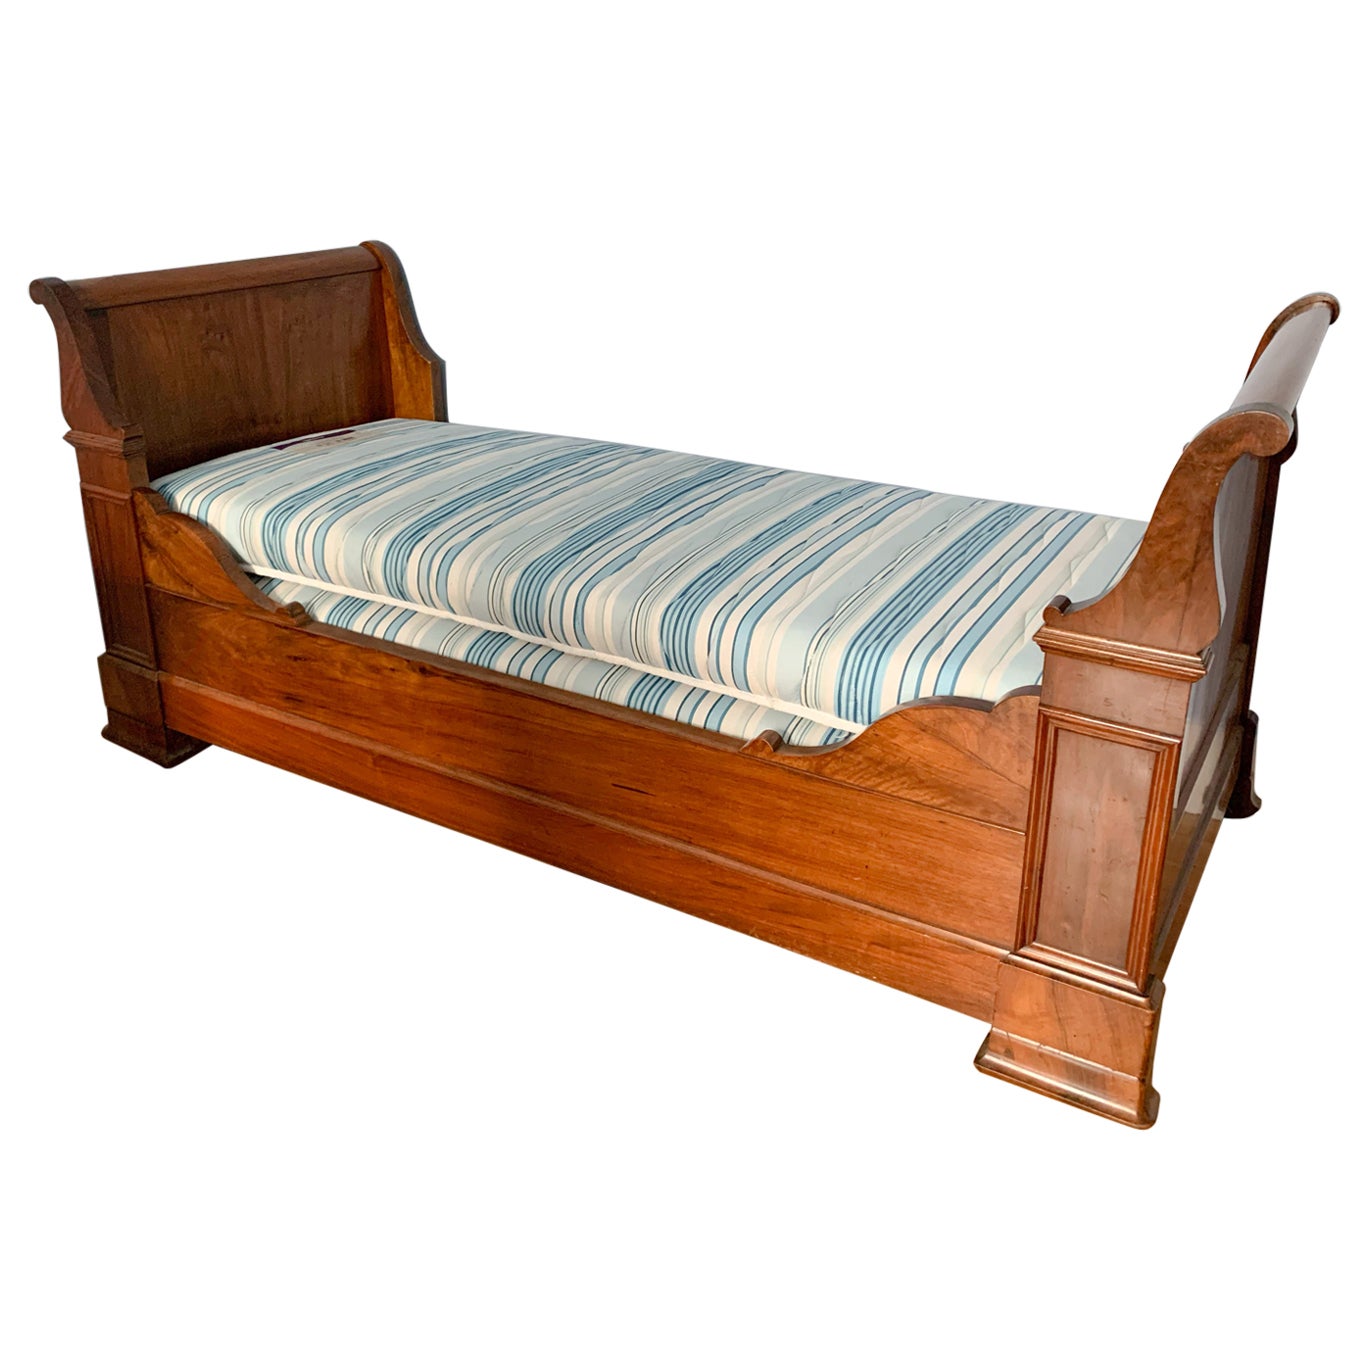 Boat Bed Louis-Philippe Period Circa 1840 For Sale